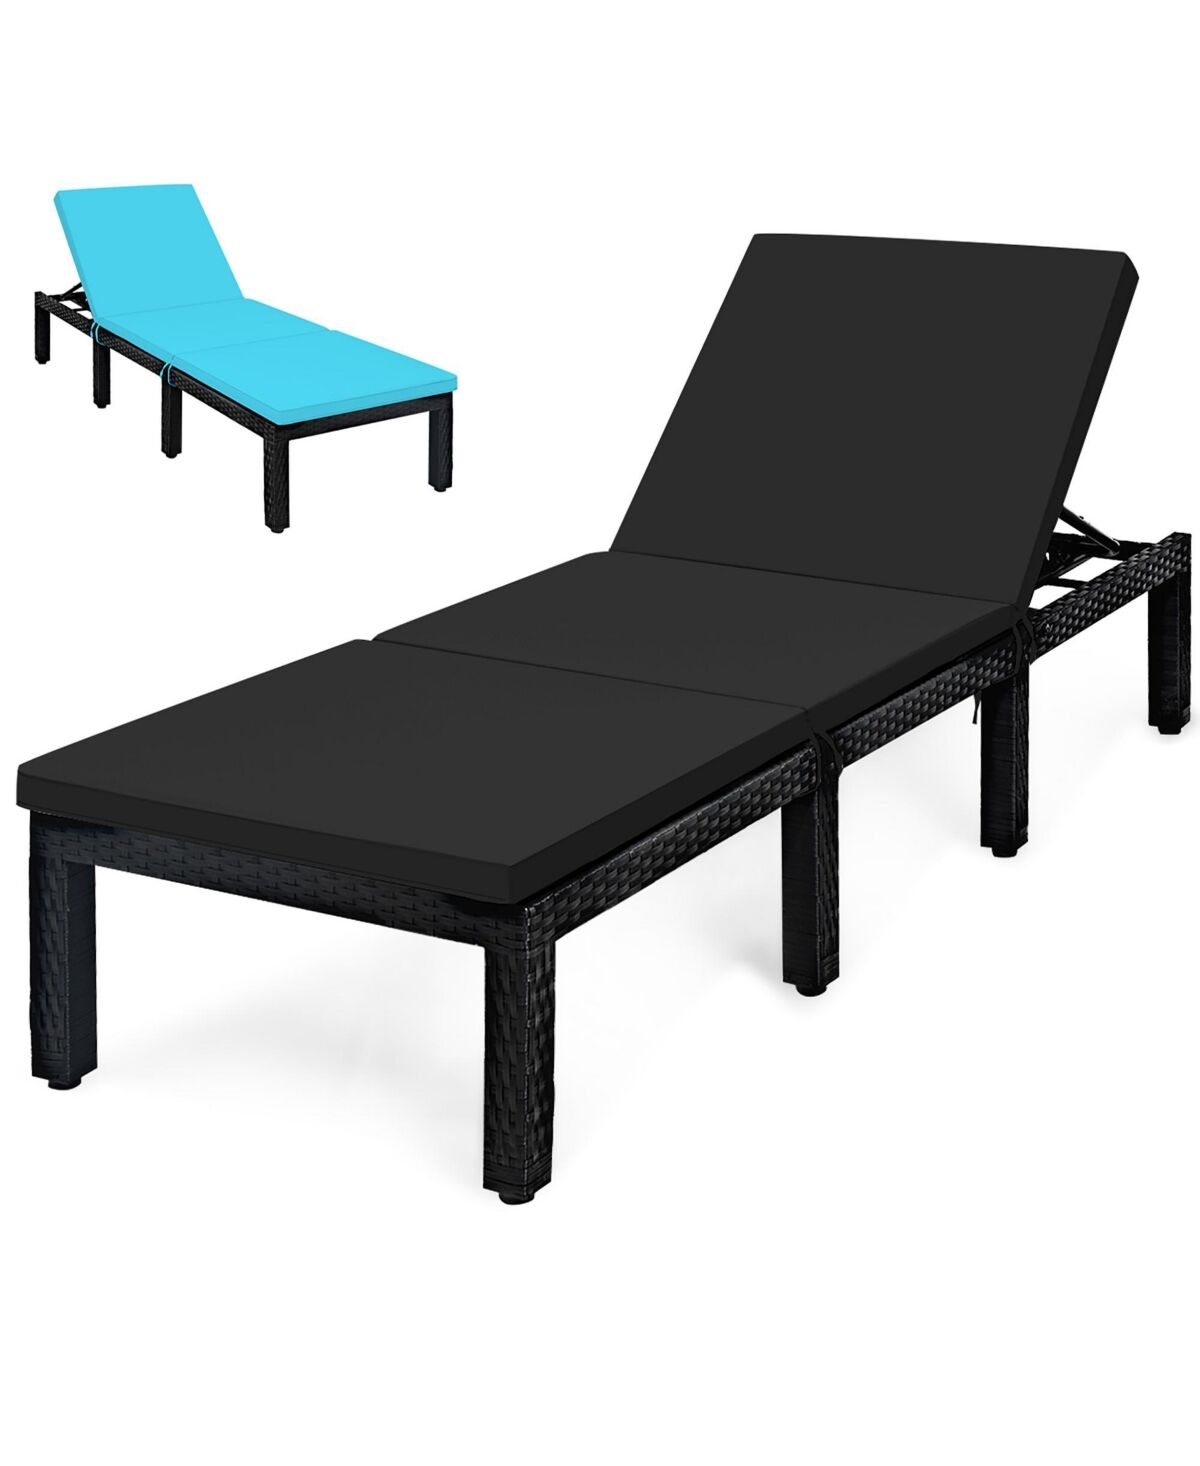 Costway Patio Rattan Lounge Chair Chaise Recliner Adjust Cushion - Black